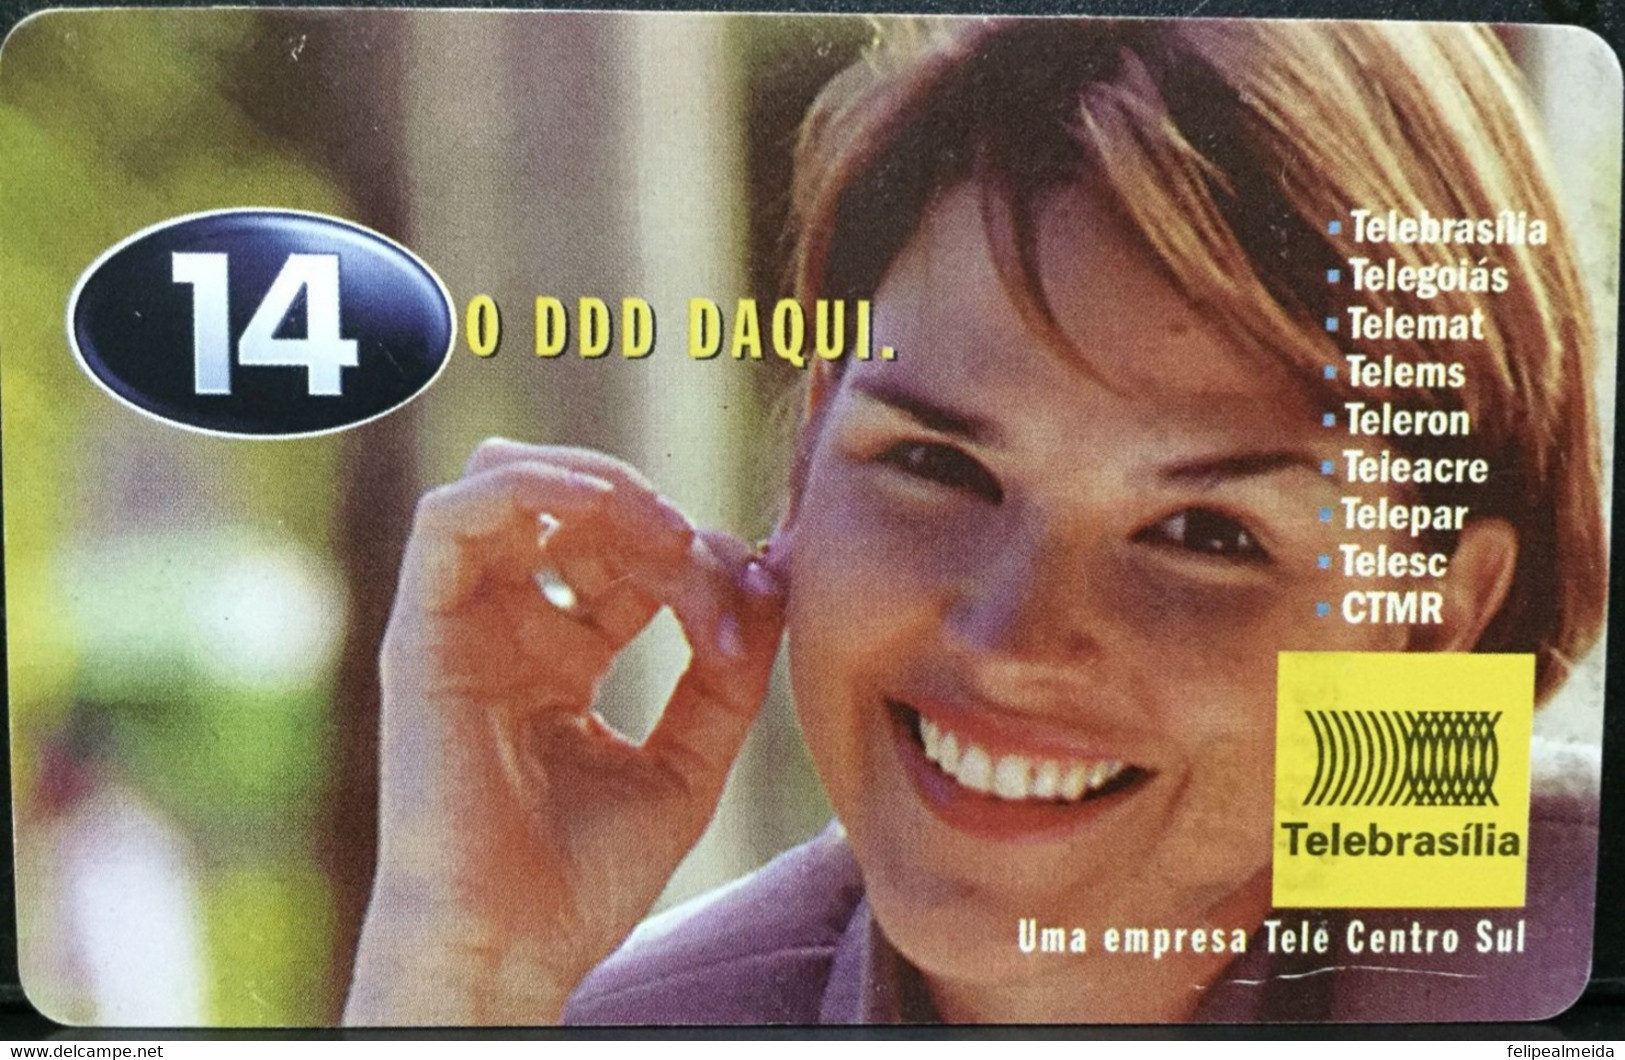 Phone Card Manufactured By Telebrasilia In 1999 - Information Card On The Use Of DDD In Calls - Telecom Operators